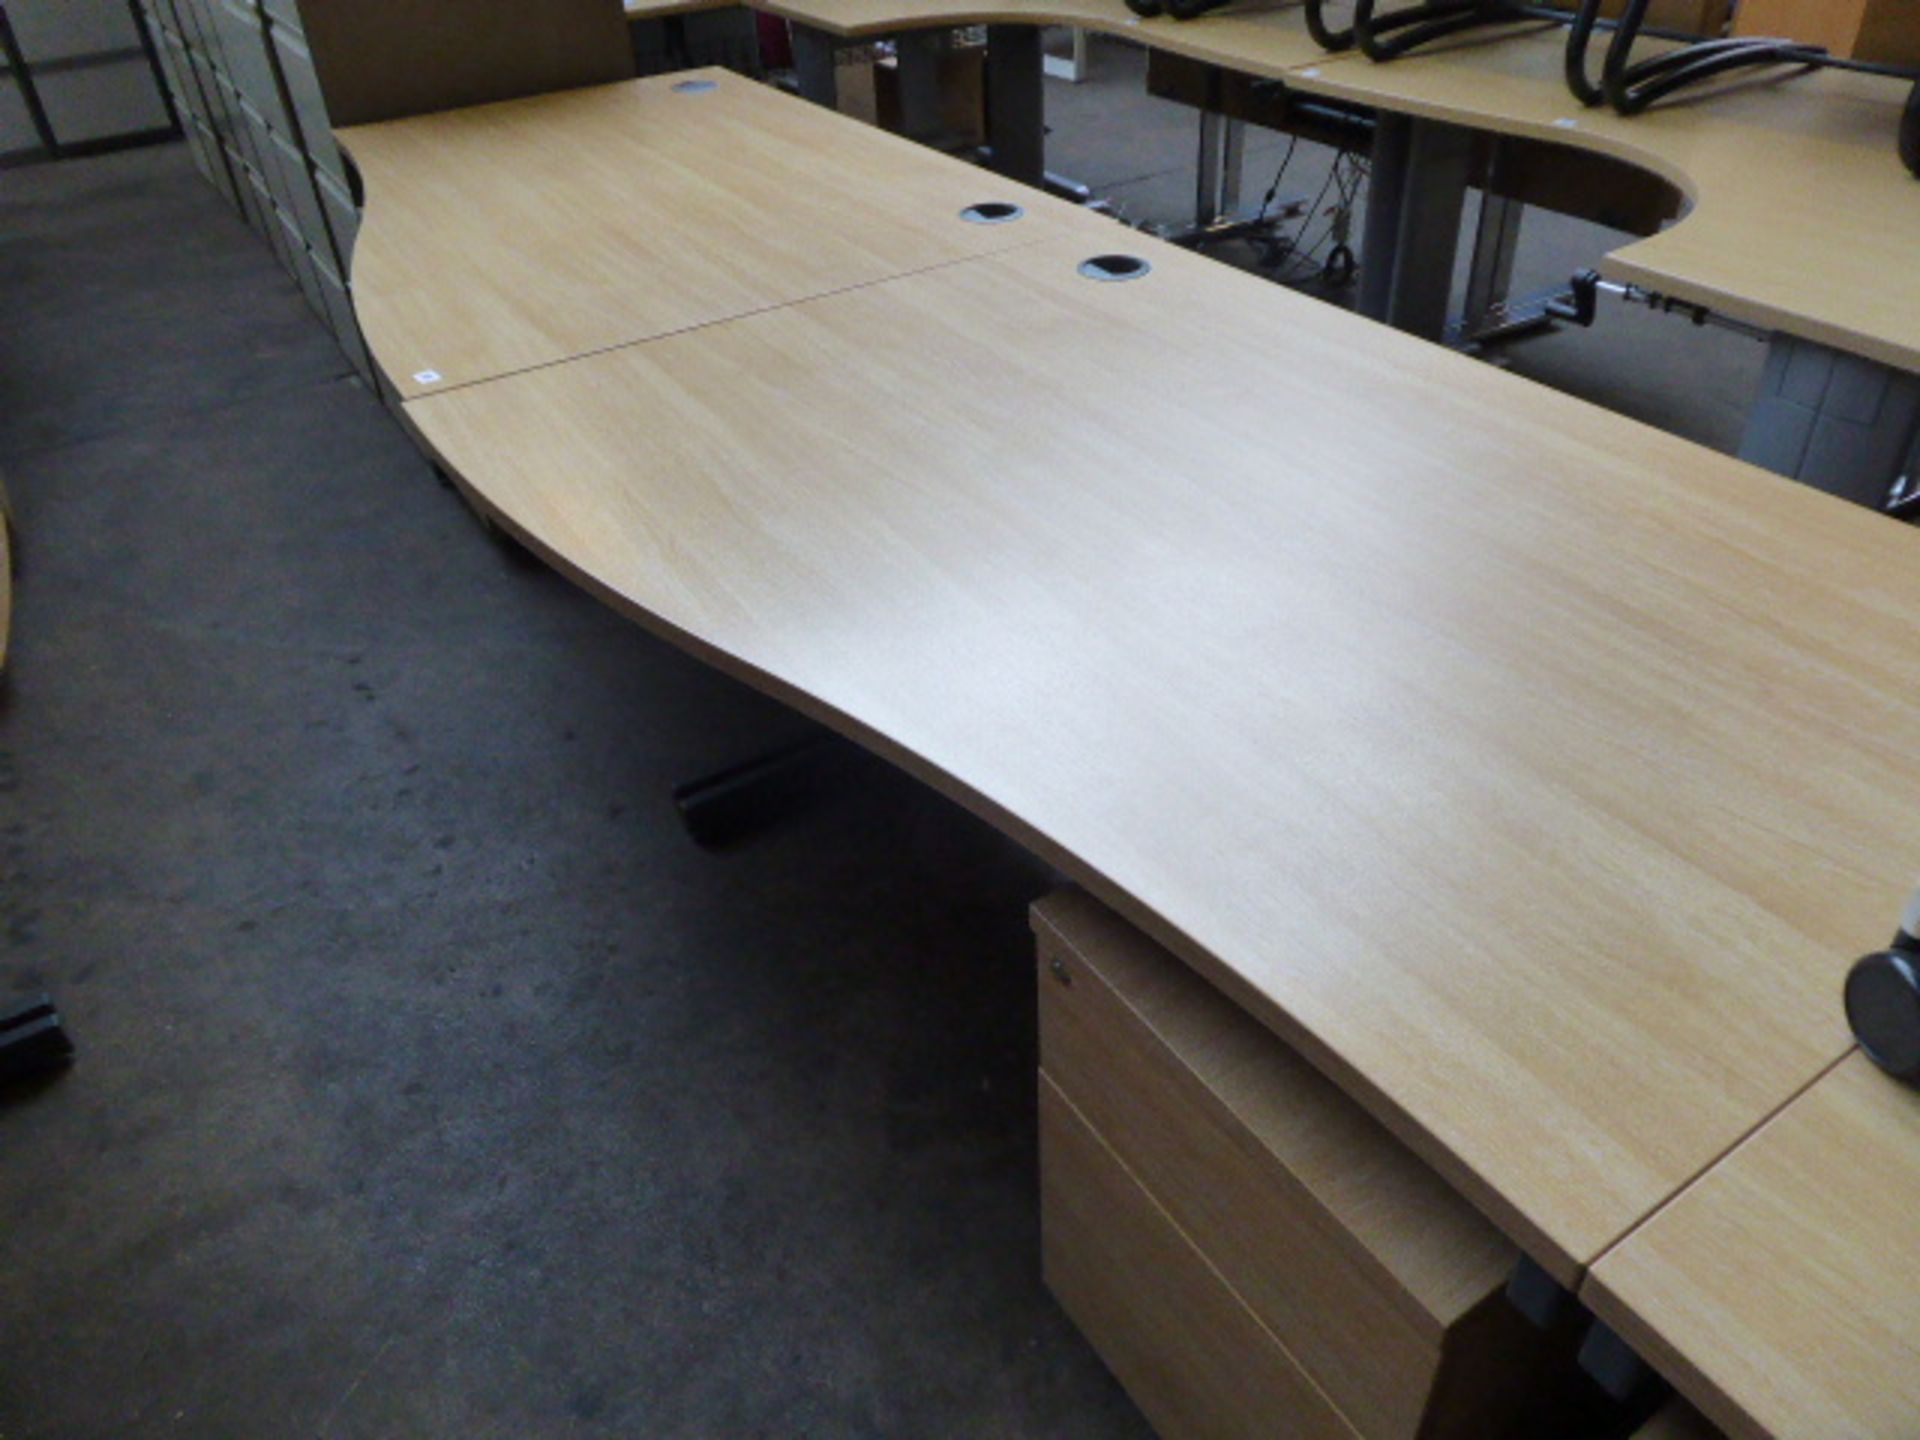 2 140cm light oak effect desks with a wave on cantilever legs and 2 matching pedestals with opposing